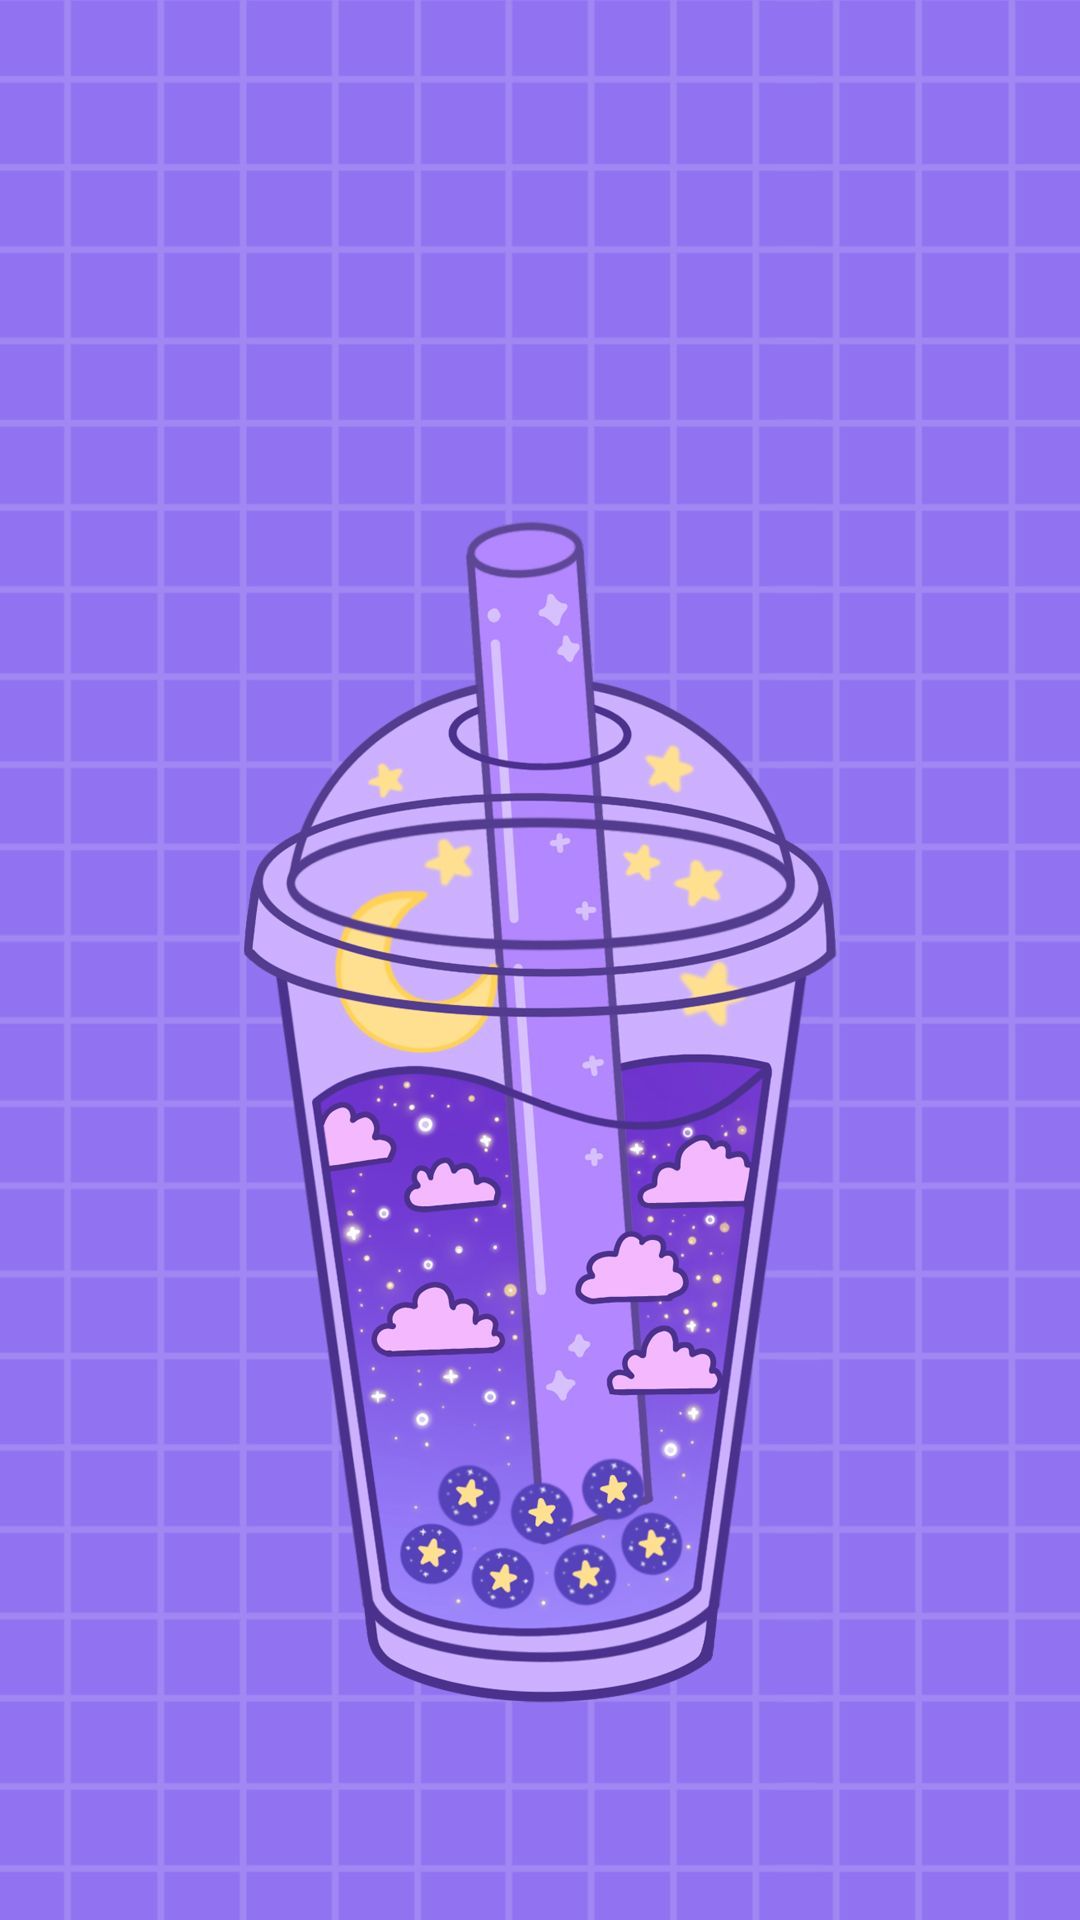 A purple boba drink in the shape of an ice cream cone - Boba